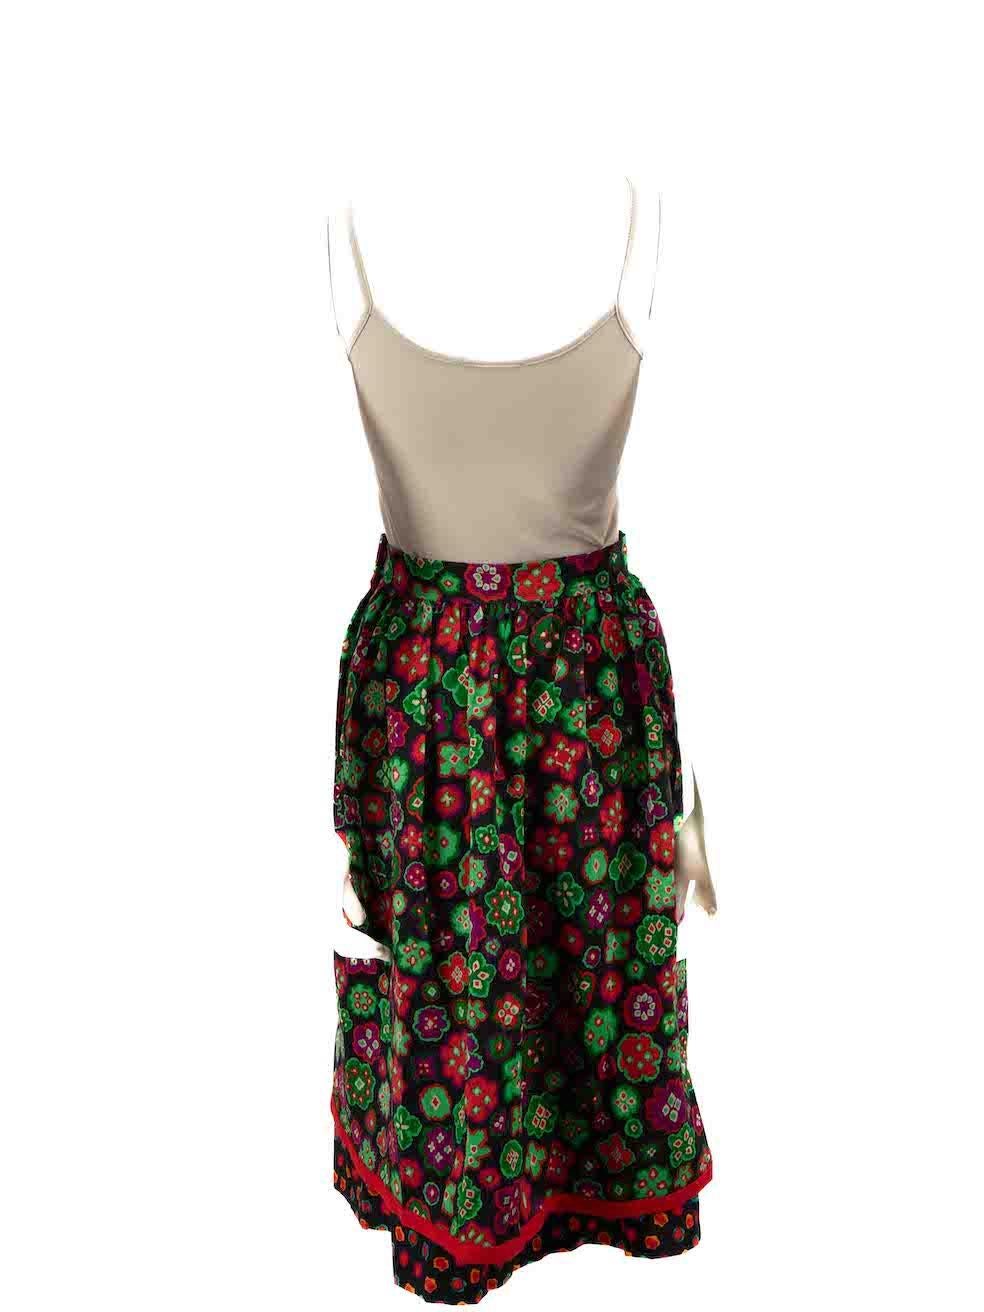 Saint Laurent Abstract Floral Wool Midi Skirt Size M In Good Condition For Sale In London, GB